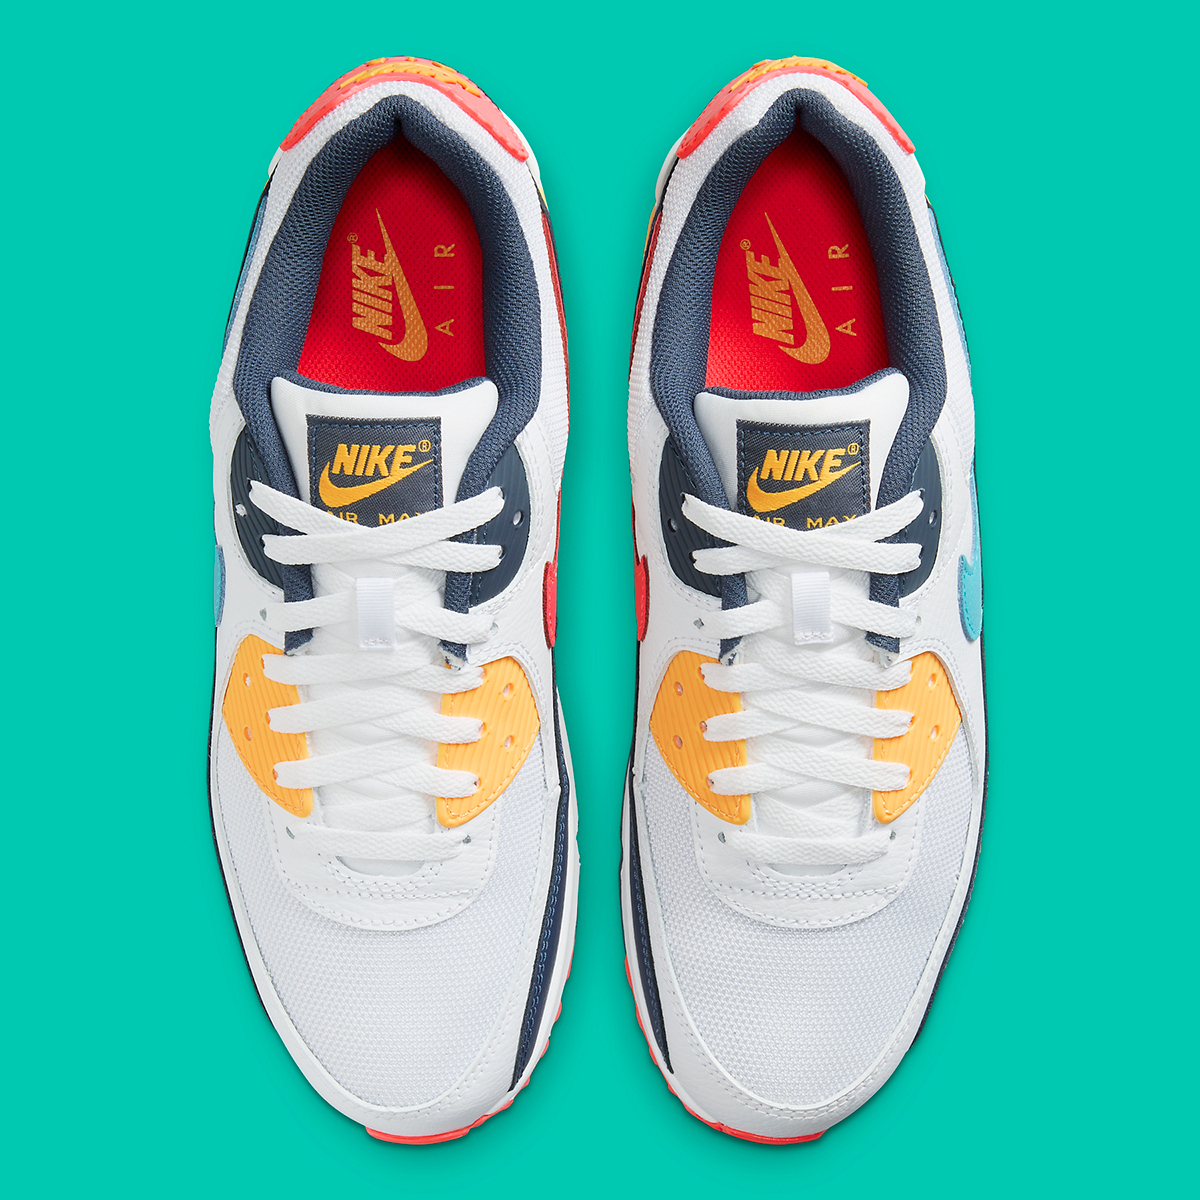 latest nike shoes with price in bangladesh 90 White University Gold Dusty Cactus Hf4860 100 8